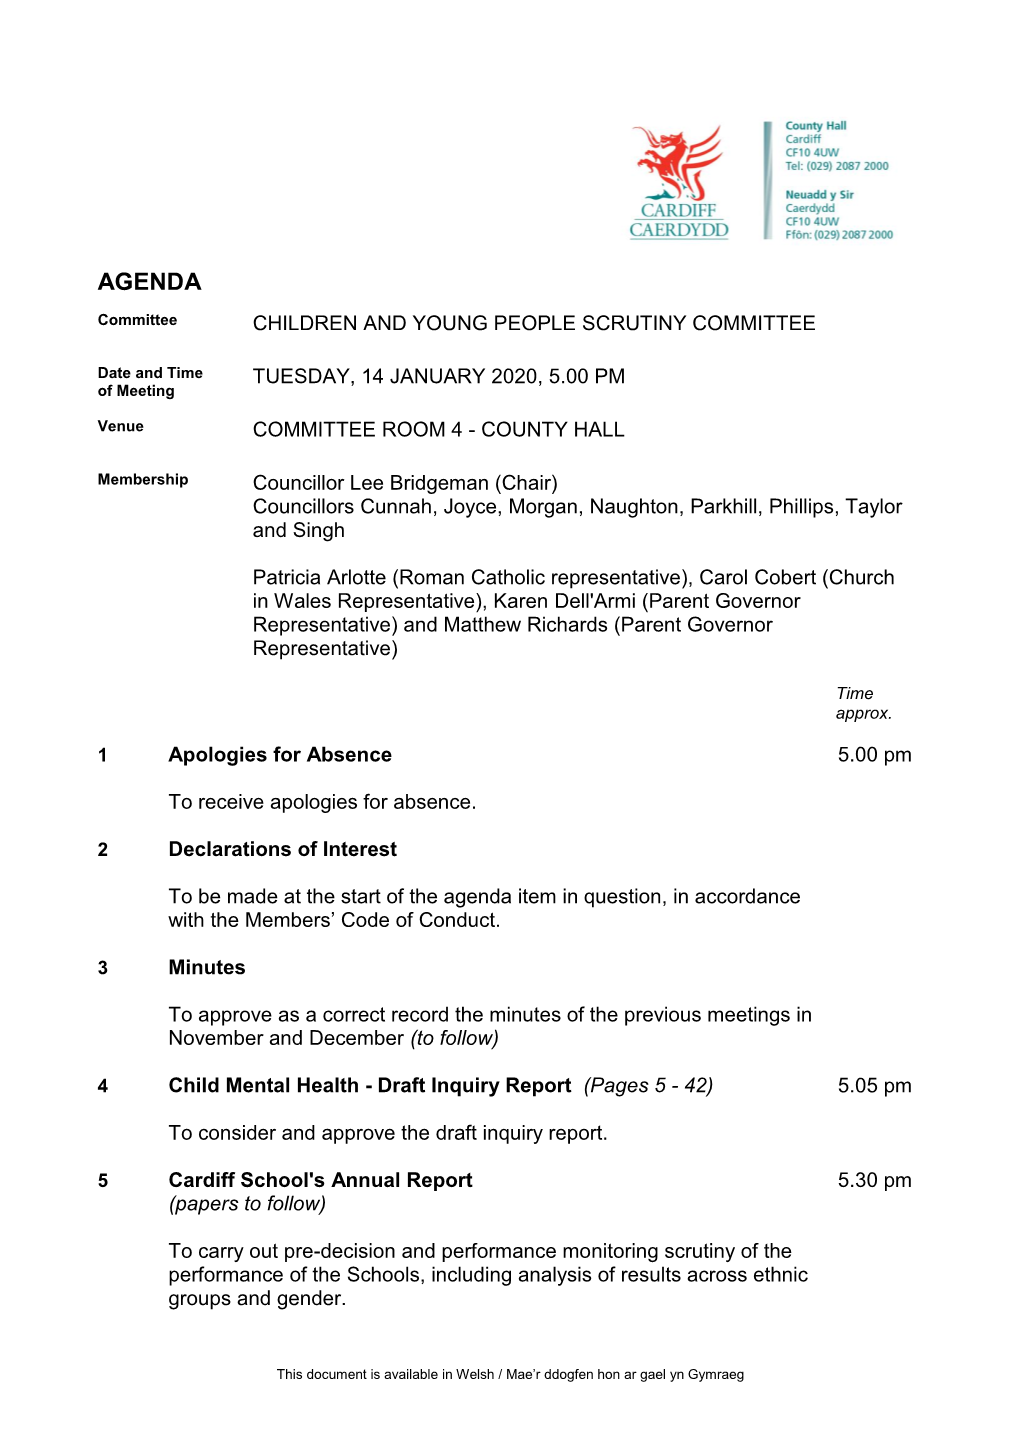 (Public Pack)Agenda Document for Children and Young People